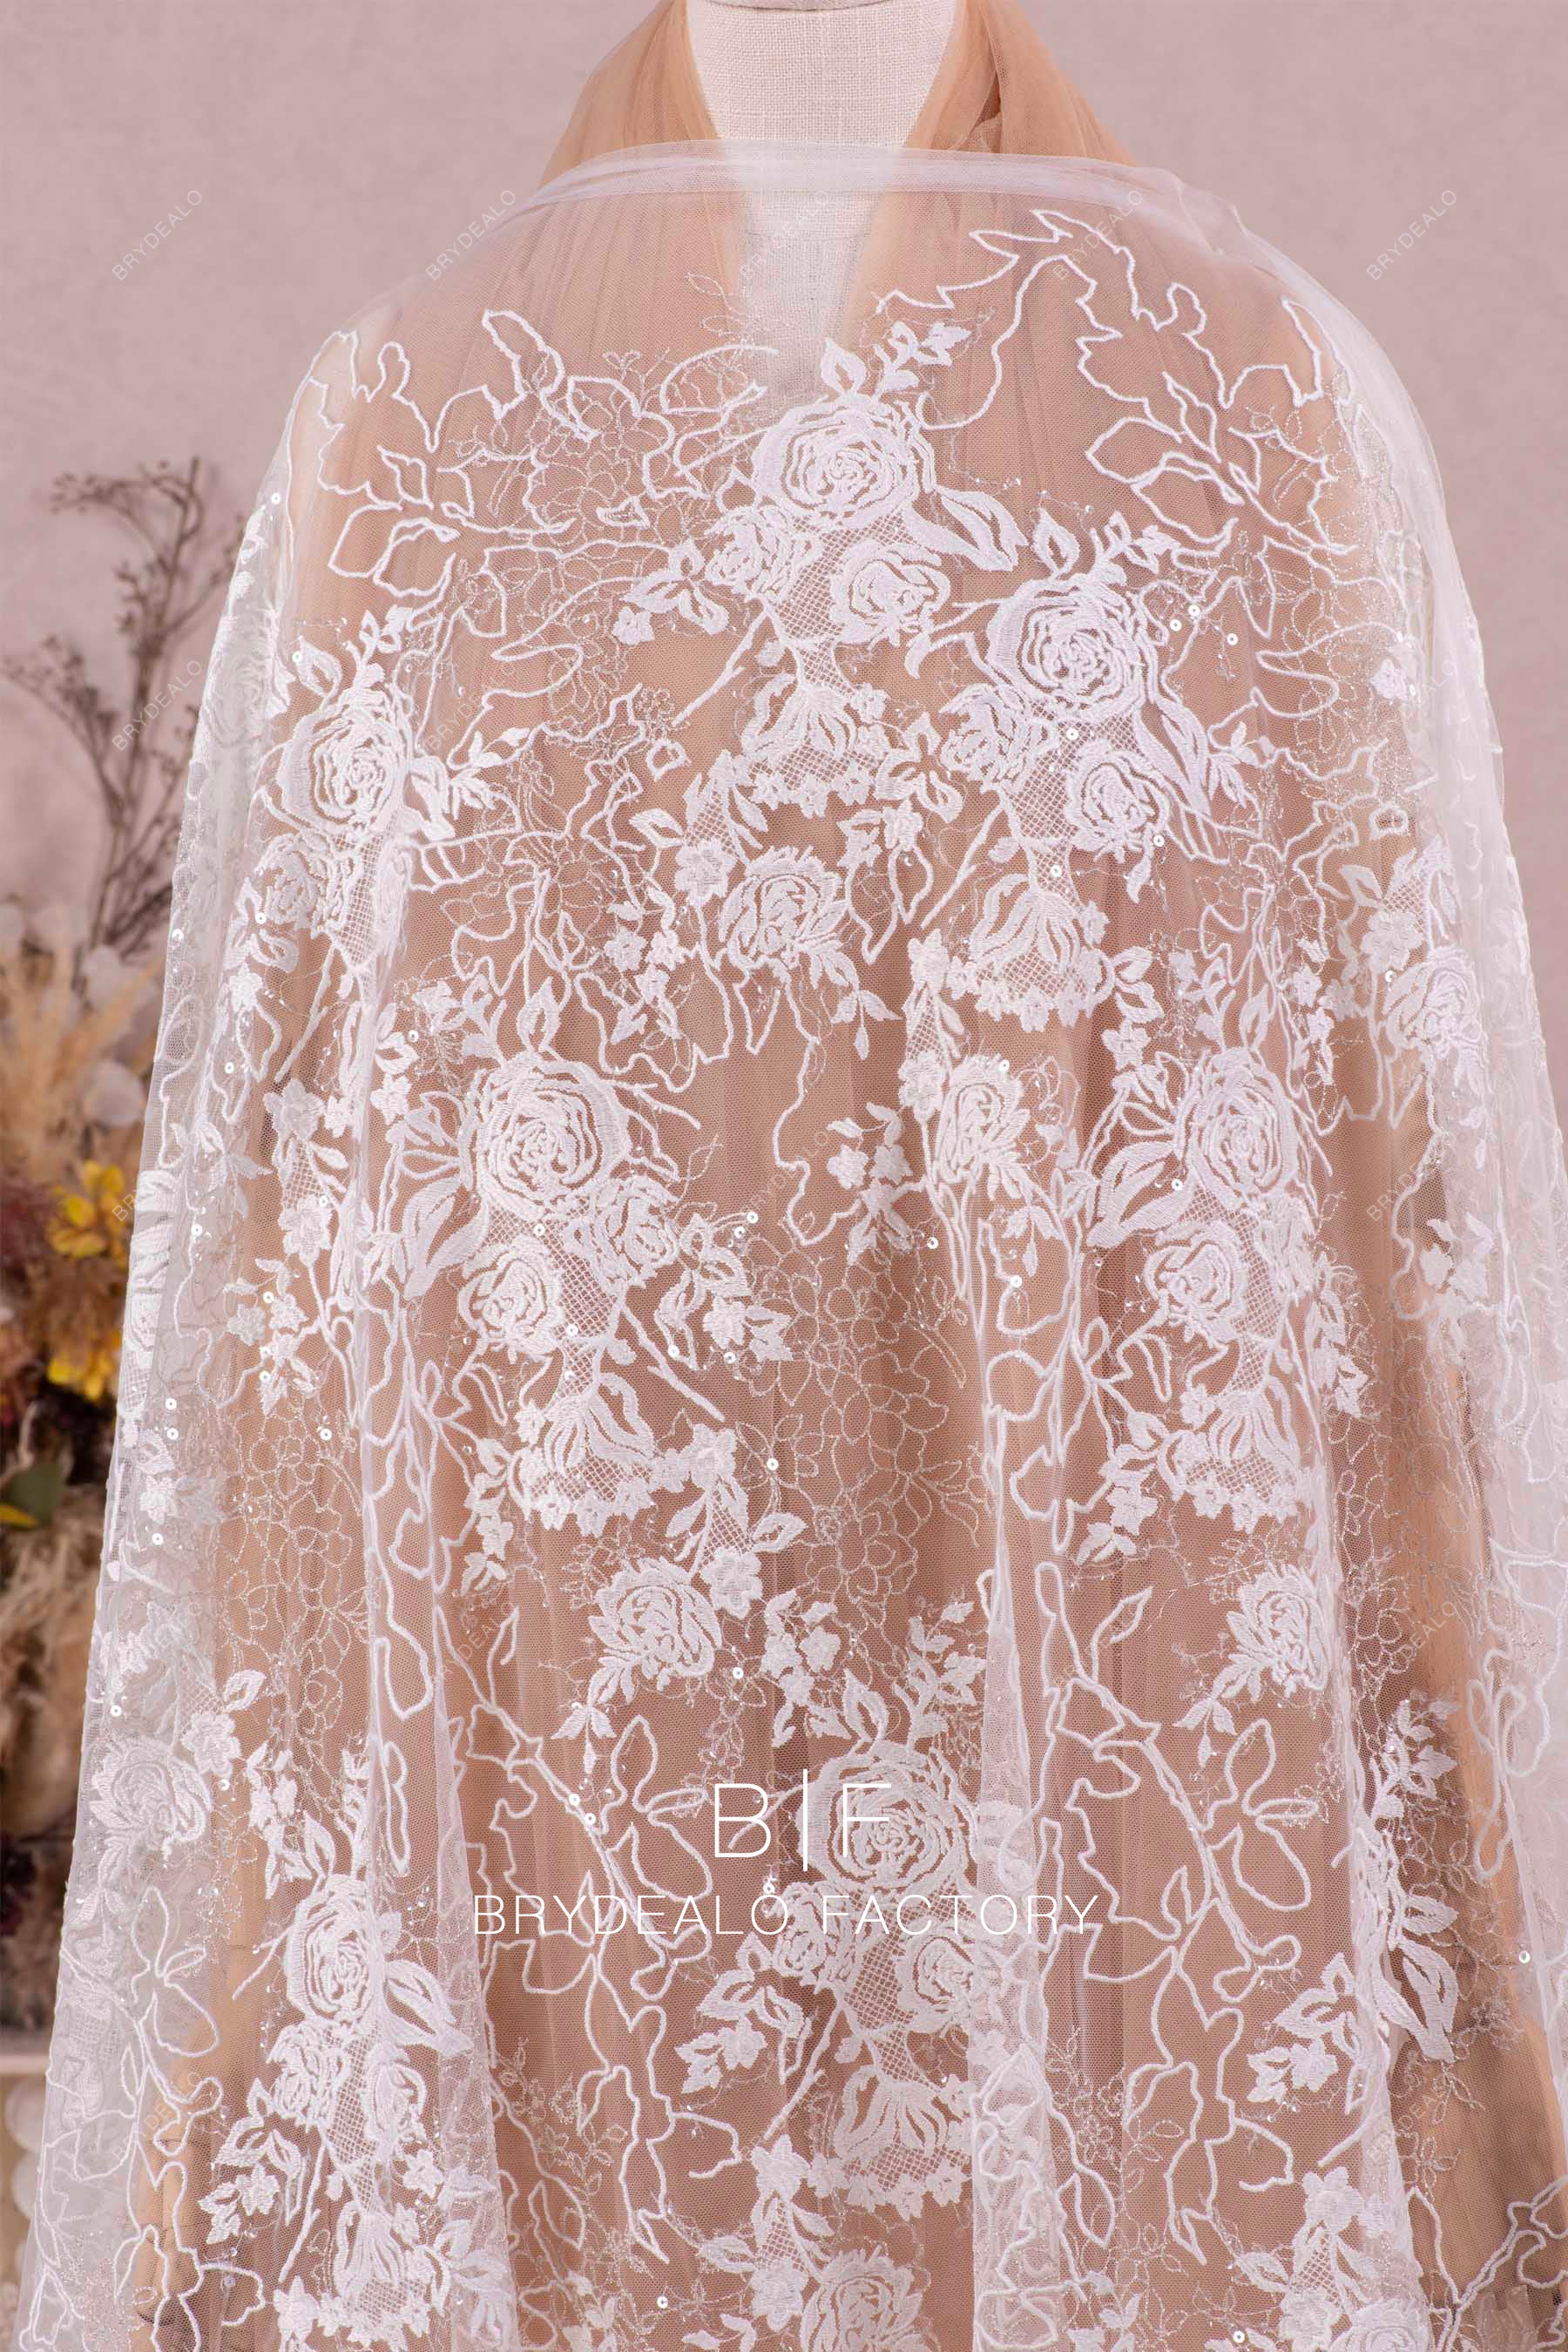 shimmery flower lace fabric